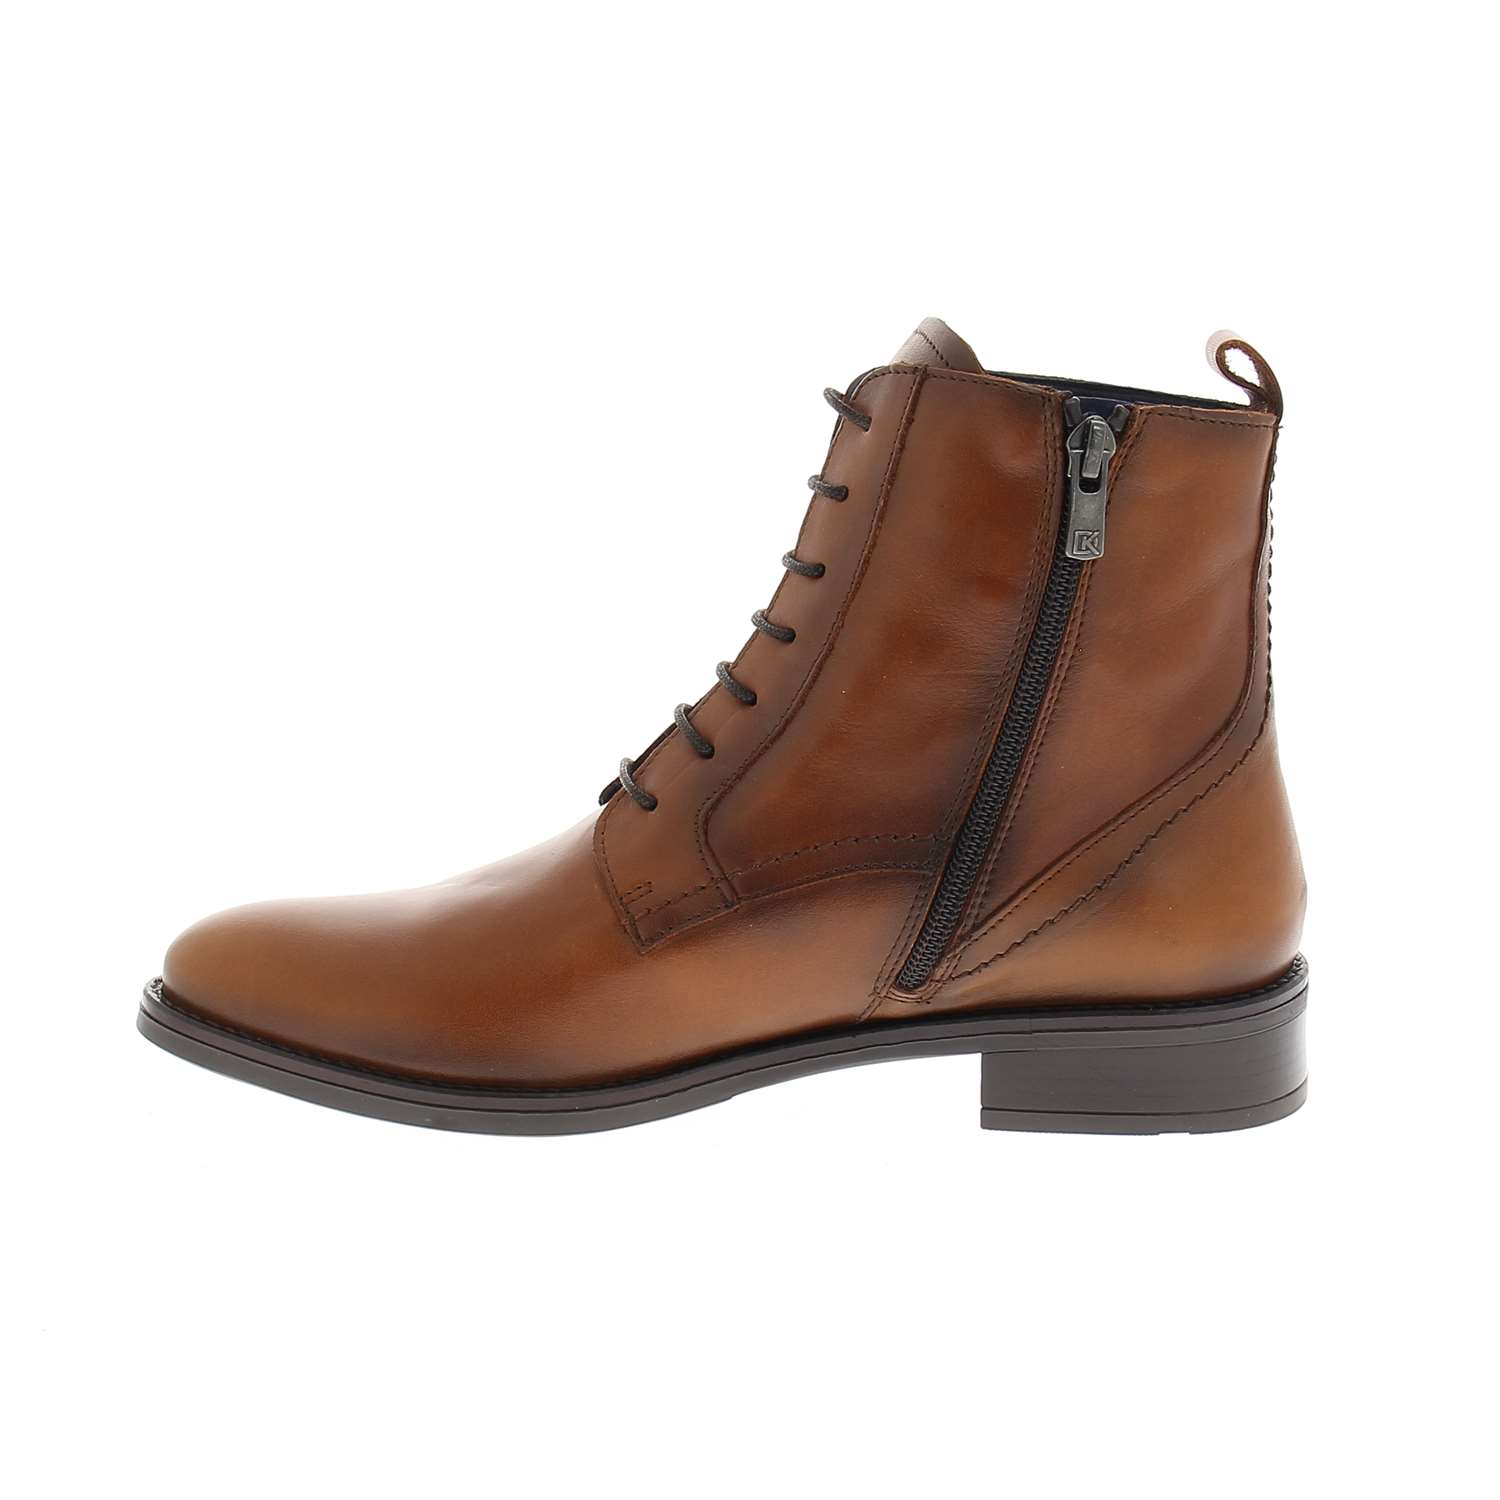 05 - DOSEPTO -  - Boots et bottines - Cuir